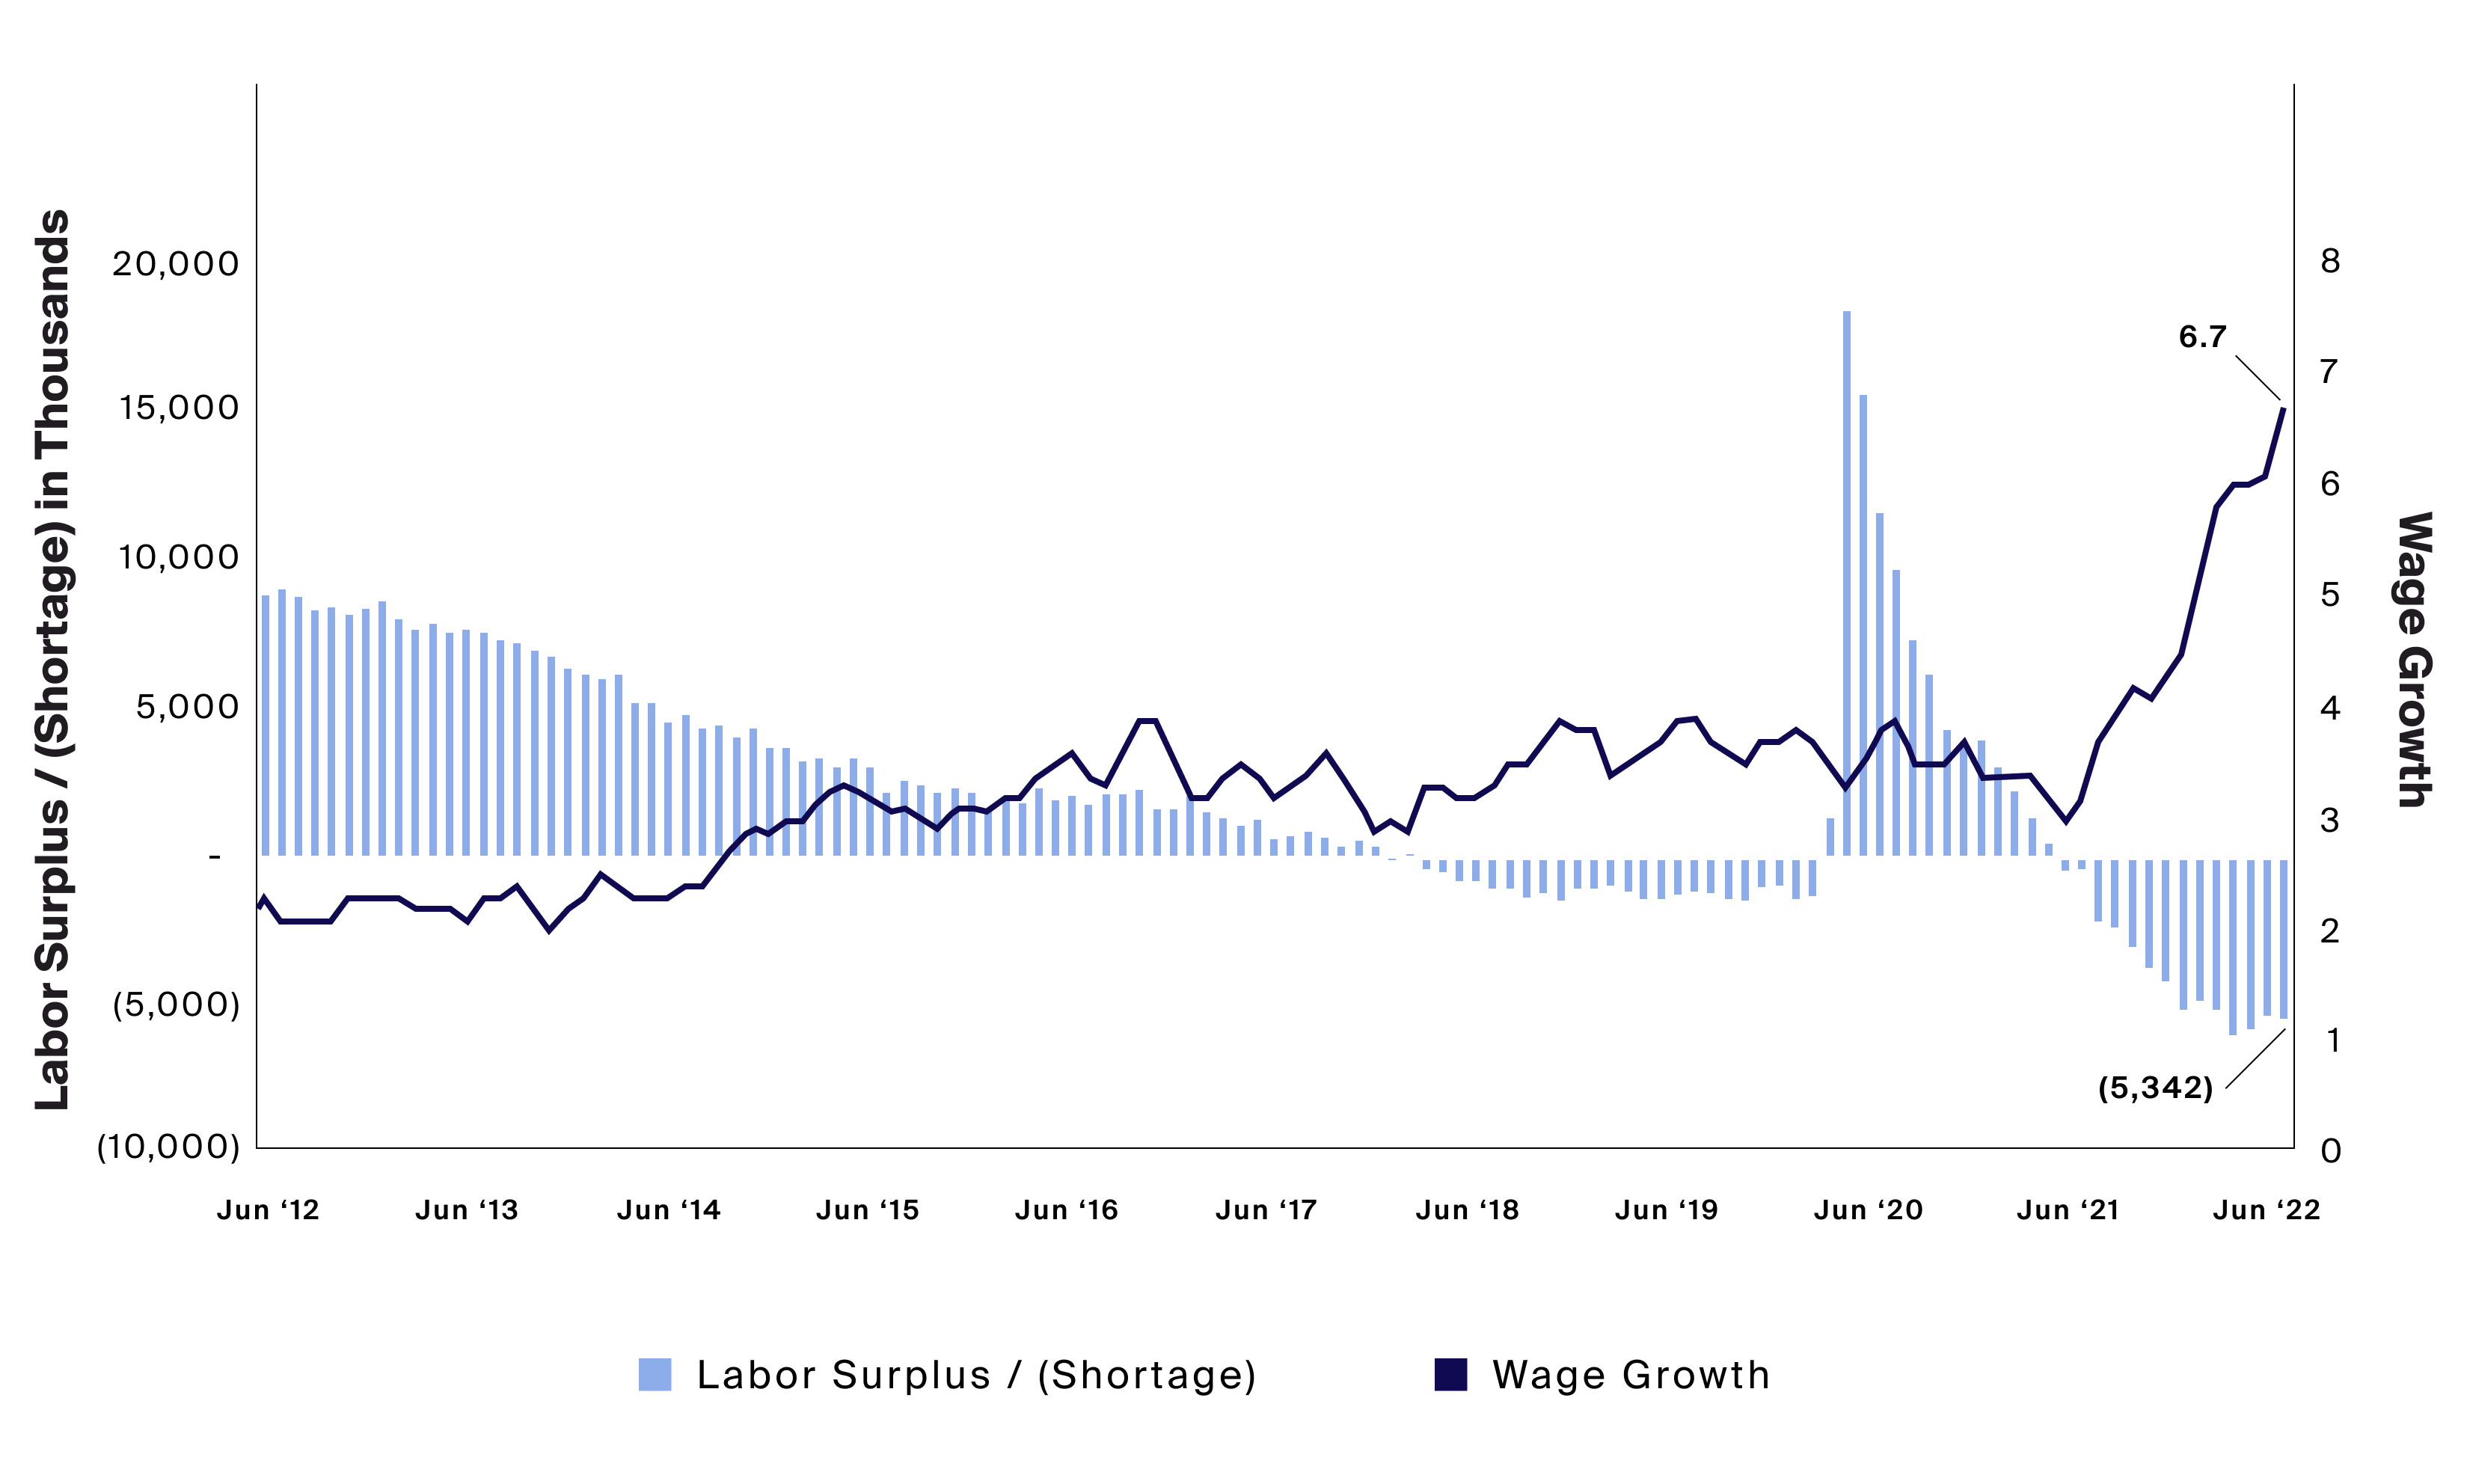 A tight labor market appears to have driven up wages, which could sustain upward pressure on prices until the labor shortage subsides